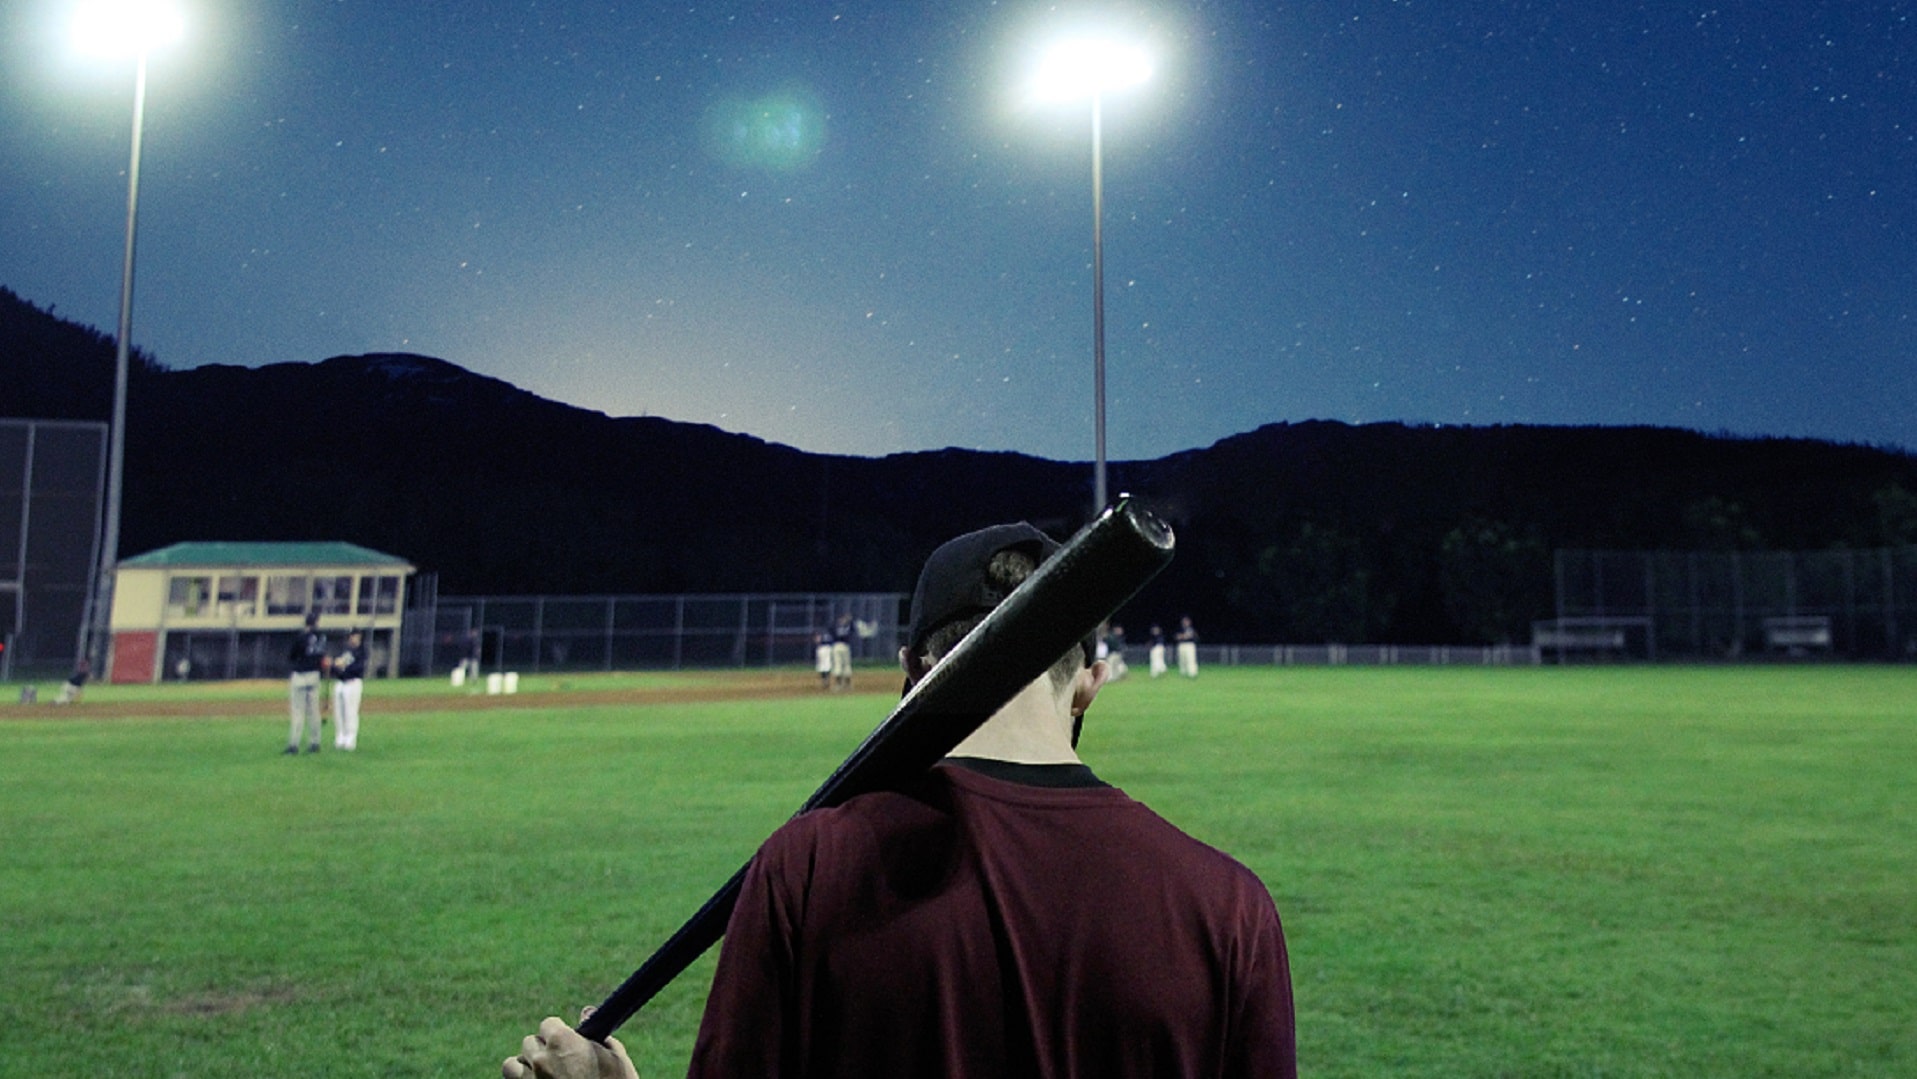 baseball player in field at night